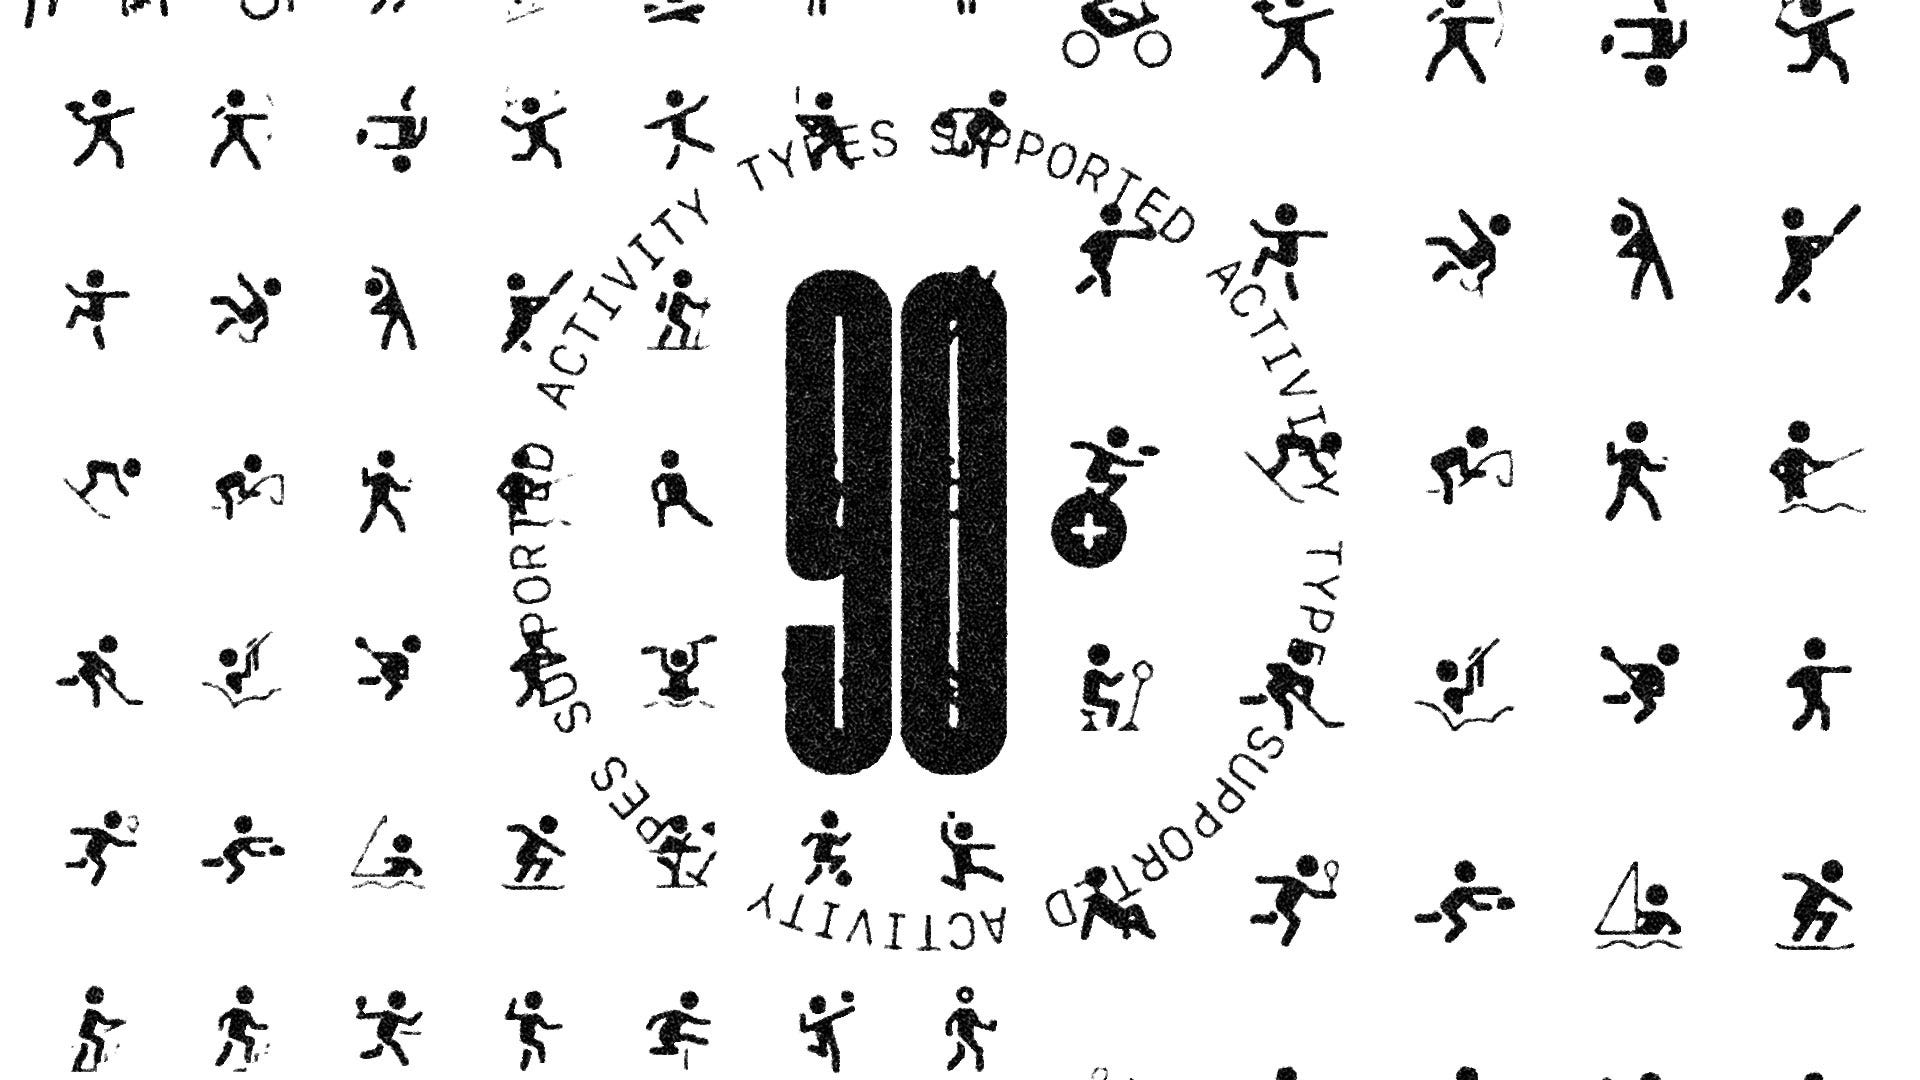 An array of Activity icons in black and white with the header "90+ Activity types supported."